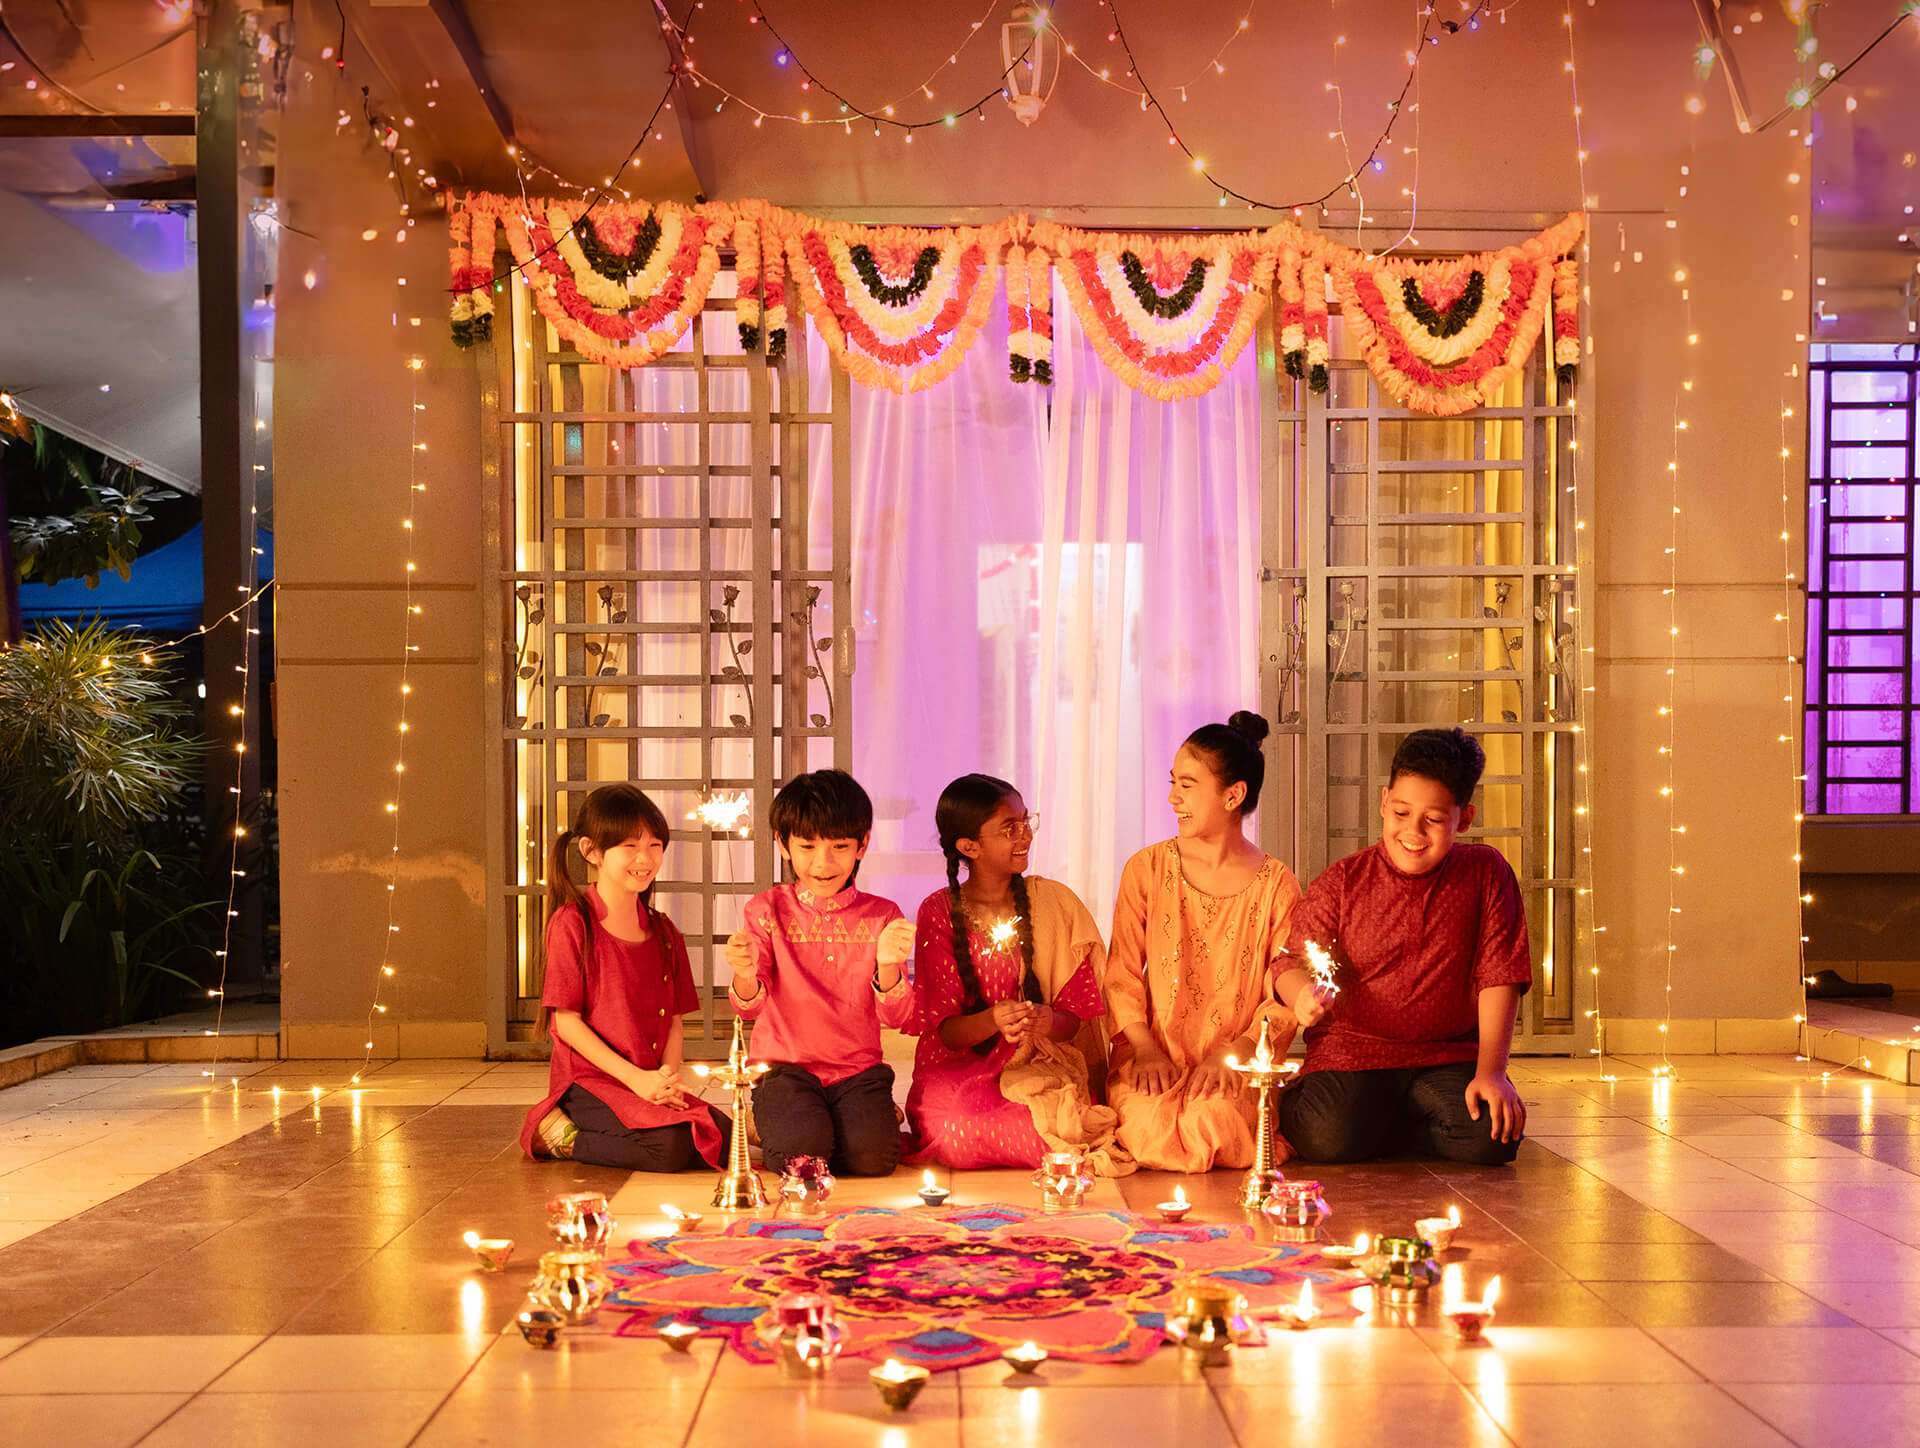 Glimpse into the enchanting customs of Deepavali by exploring the colourful rituals of this joyous Hindu festival at Sunway City Kuala Lumpur!